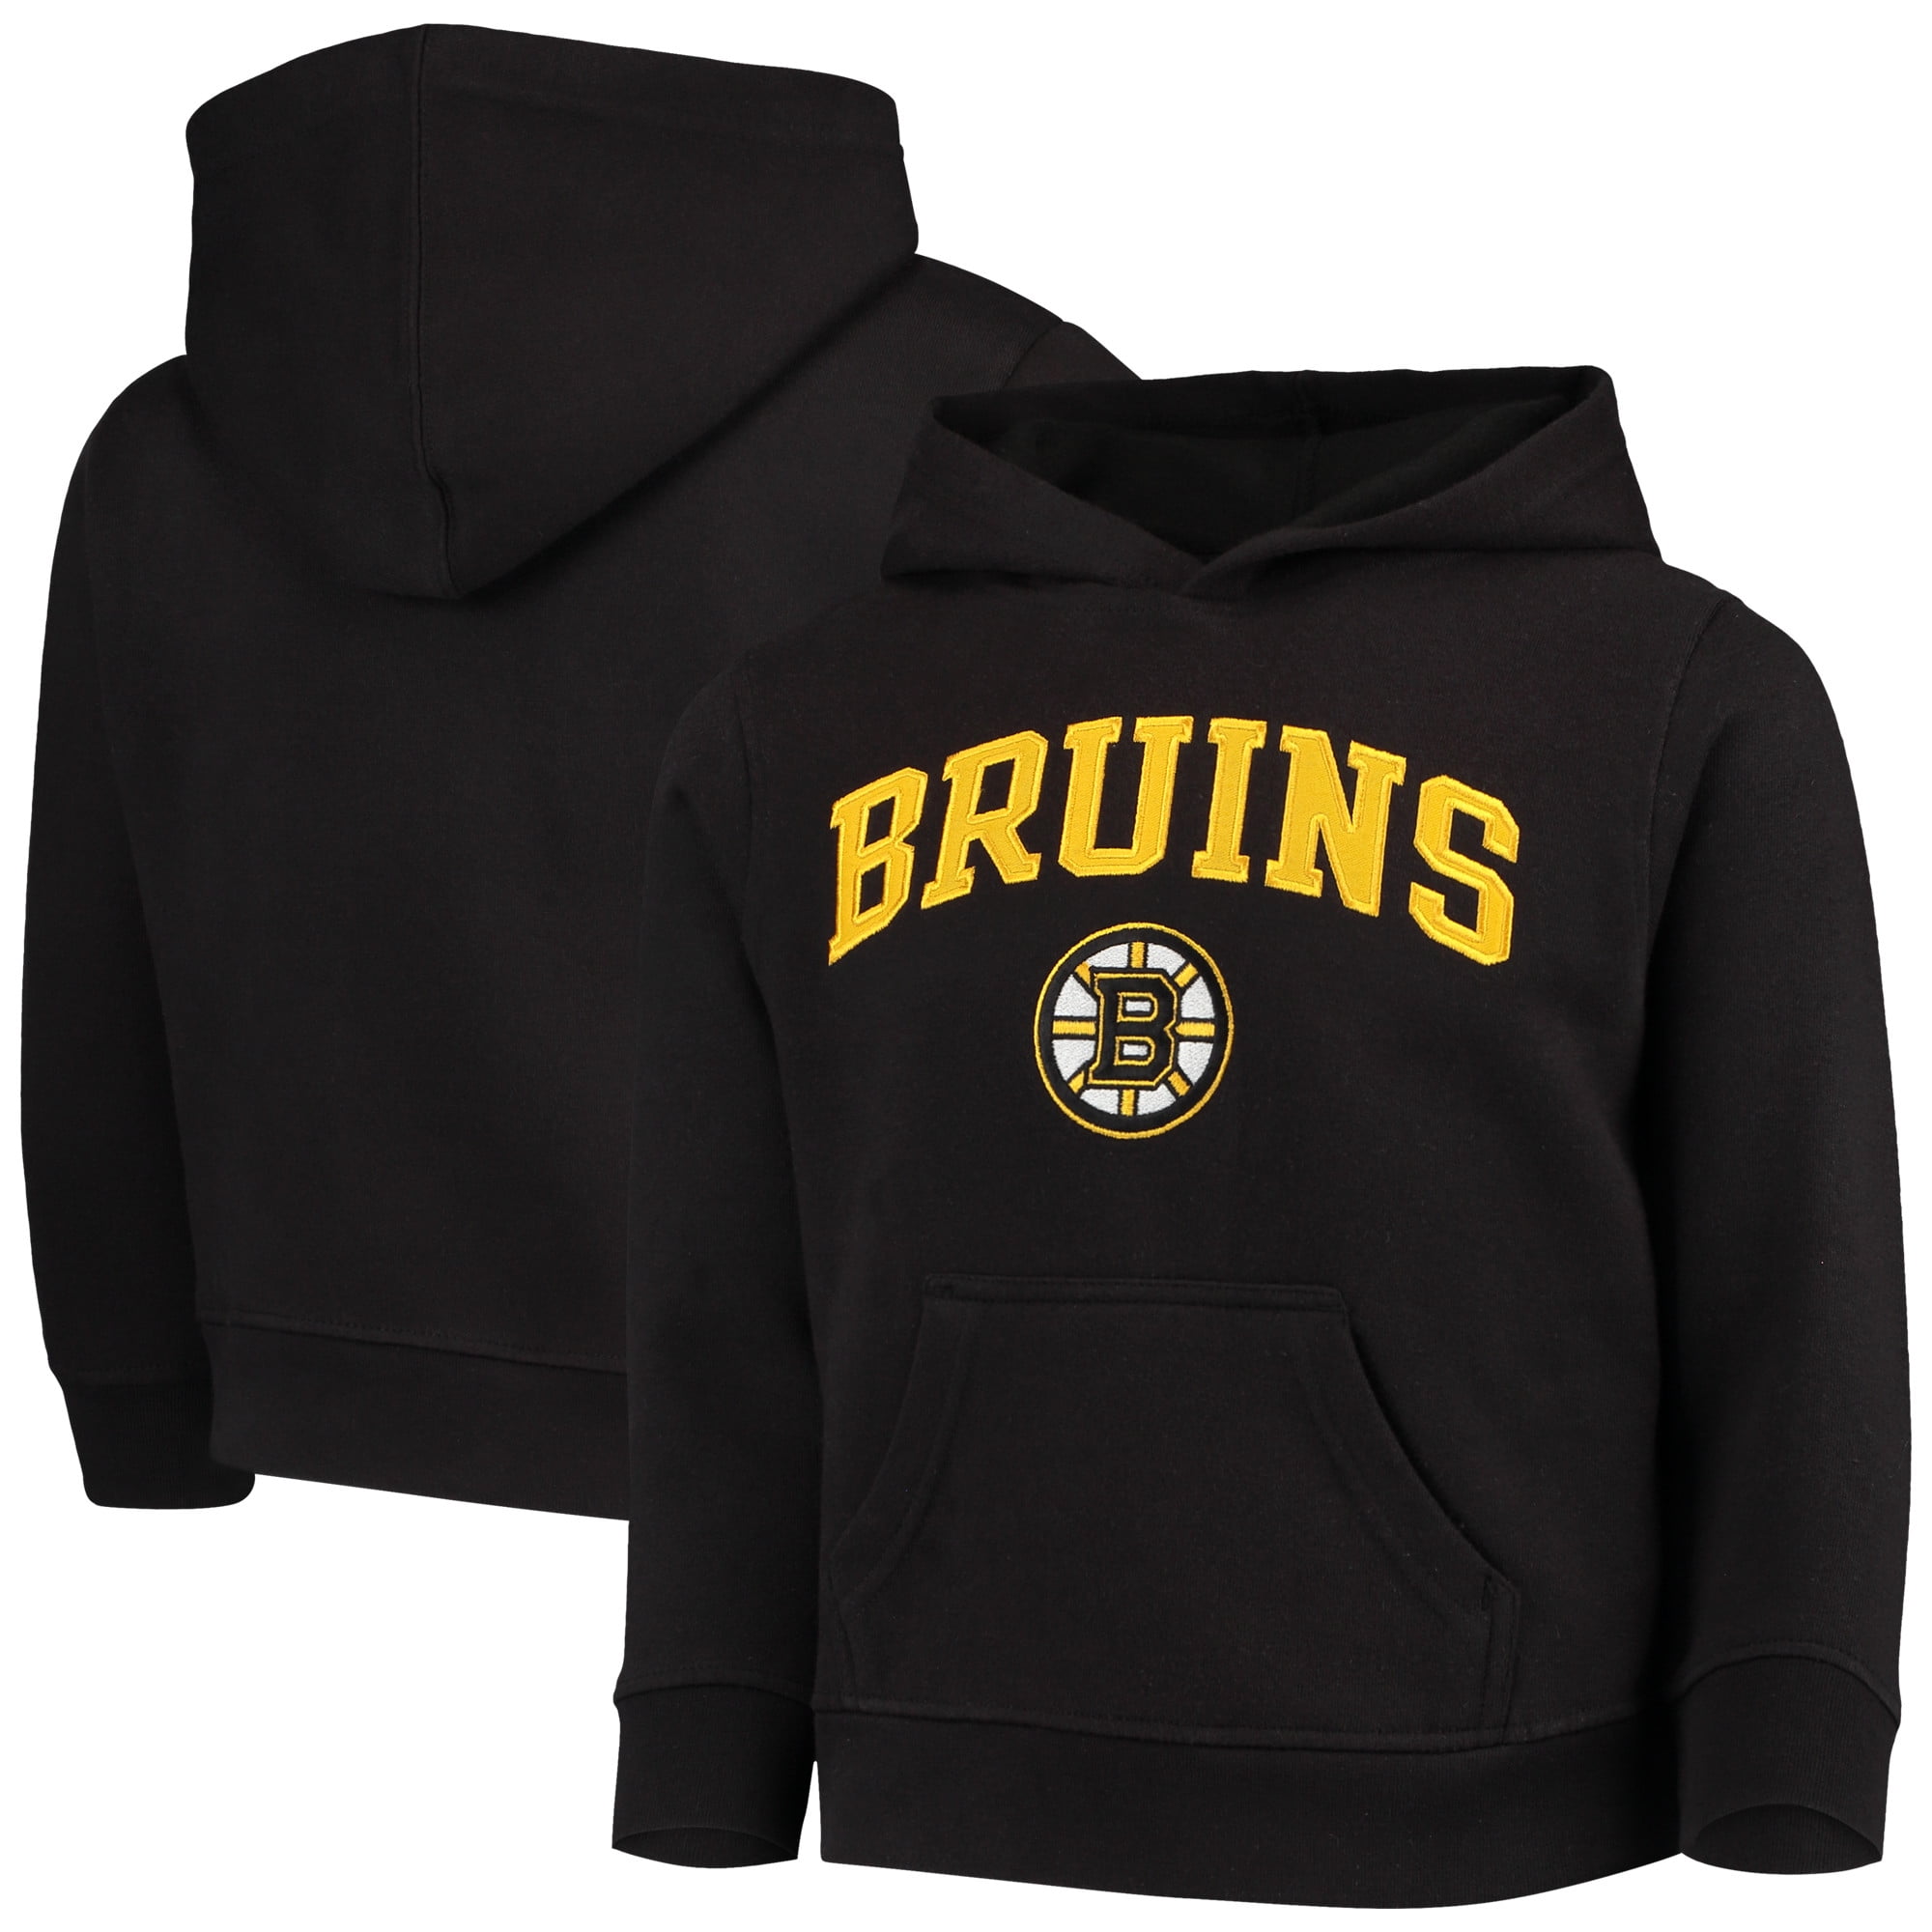 Outerstuff - Youth Black Boston Bruins Team Logo Pullover Hoodie ...